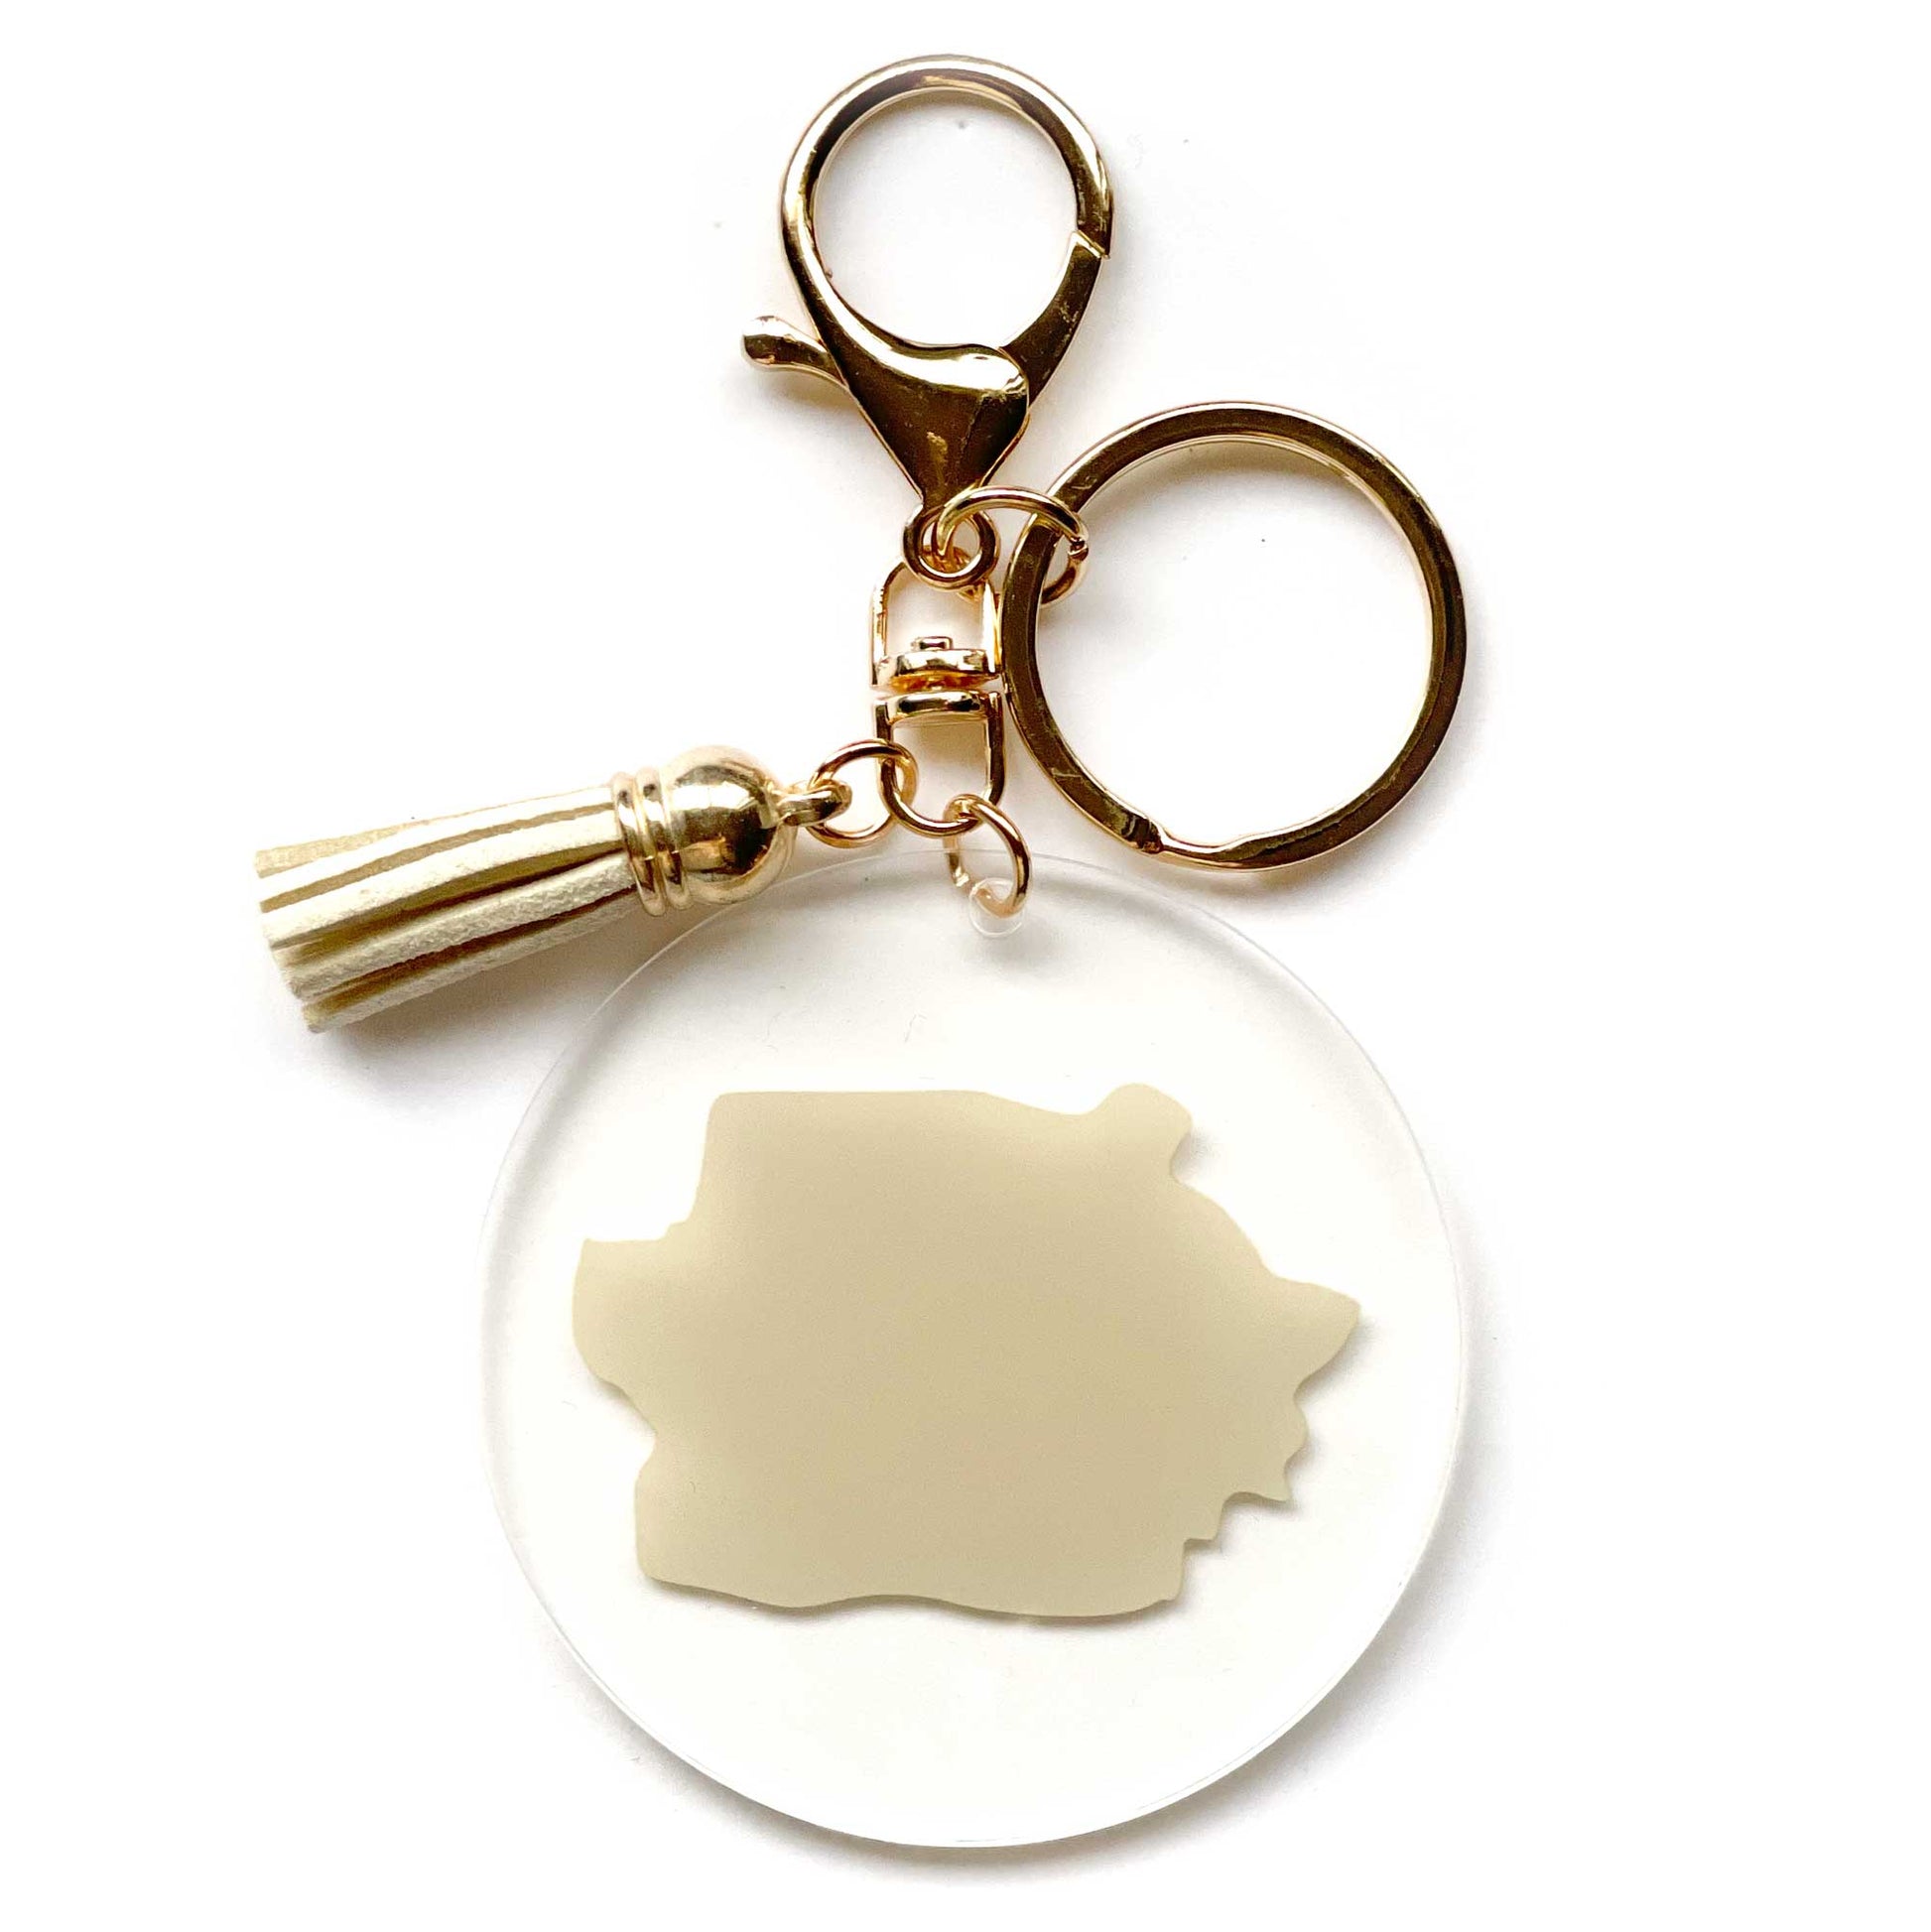 Paint Brush Printed Acrylic Keychain | Gold | Craft Blank for Cricut, Cameo Silhouette | Sand, Beige